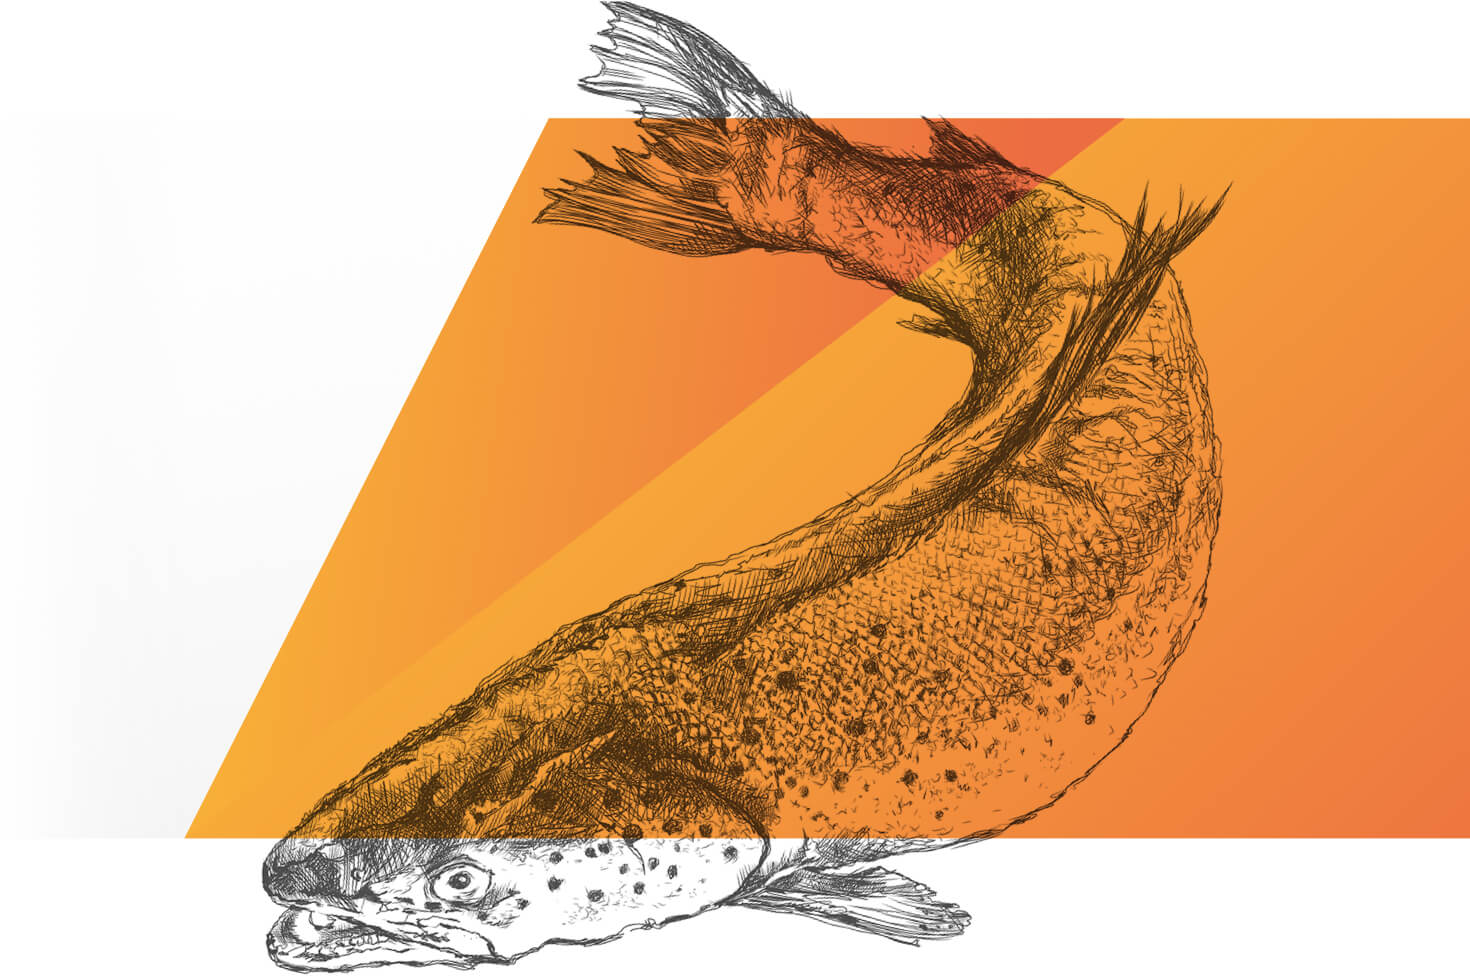 A fish drawn in black and white, partially covered with an orange, semi-transparent colored area in the foreground.